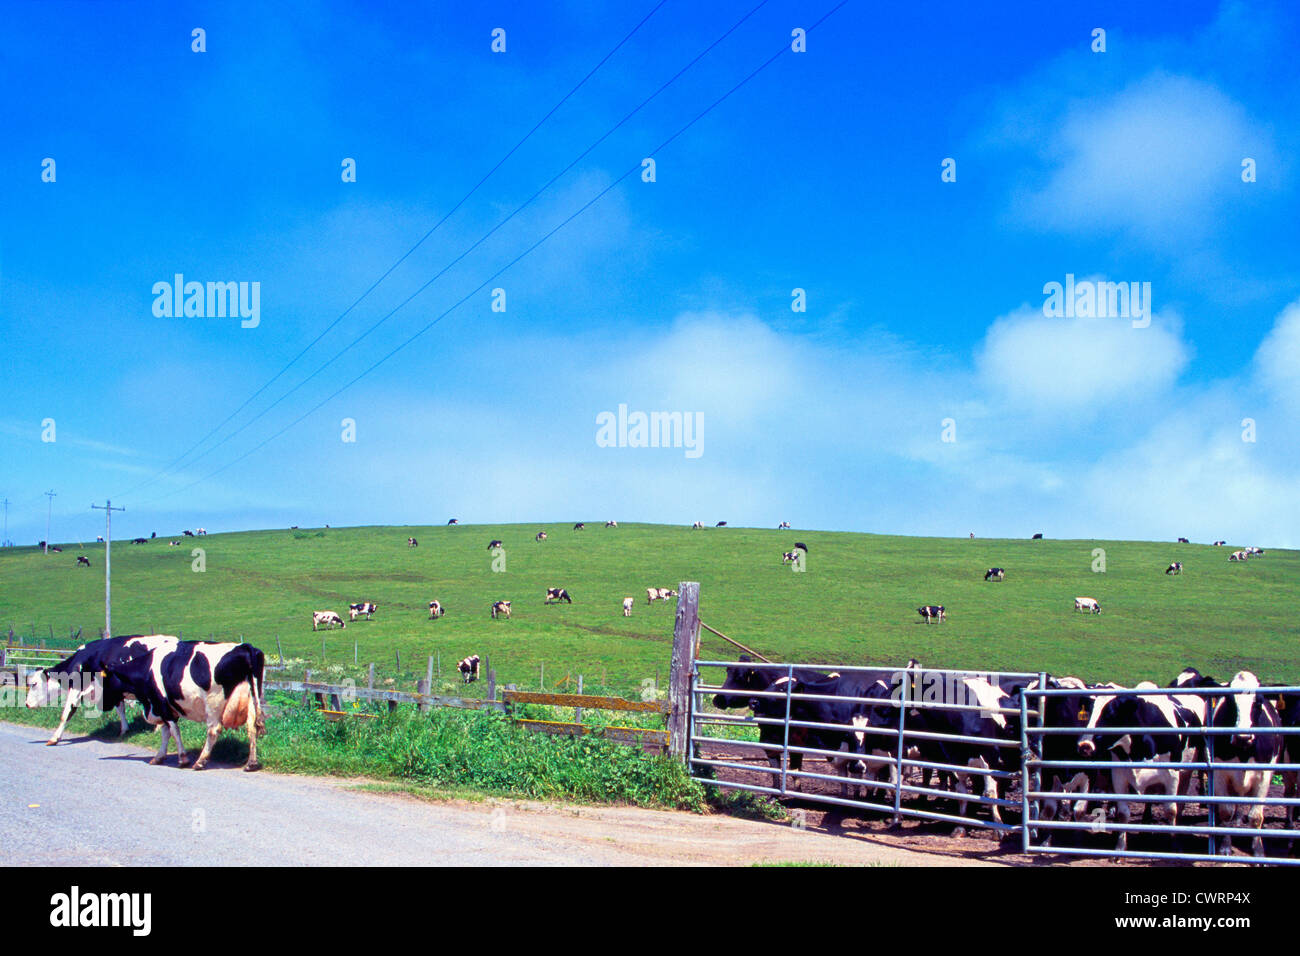 Point Reyes National Seashore, California, USA - Holstein Cows grazing in a Corral and on a Hill / Pasture at Historic ‘A’ Ranch Stock Photo